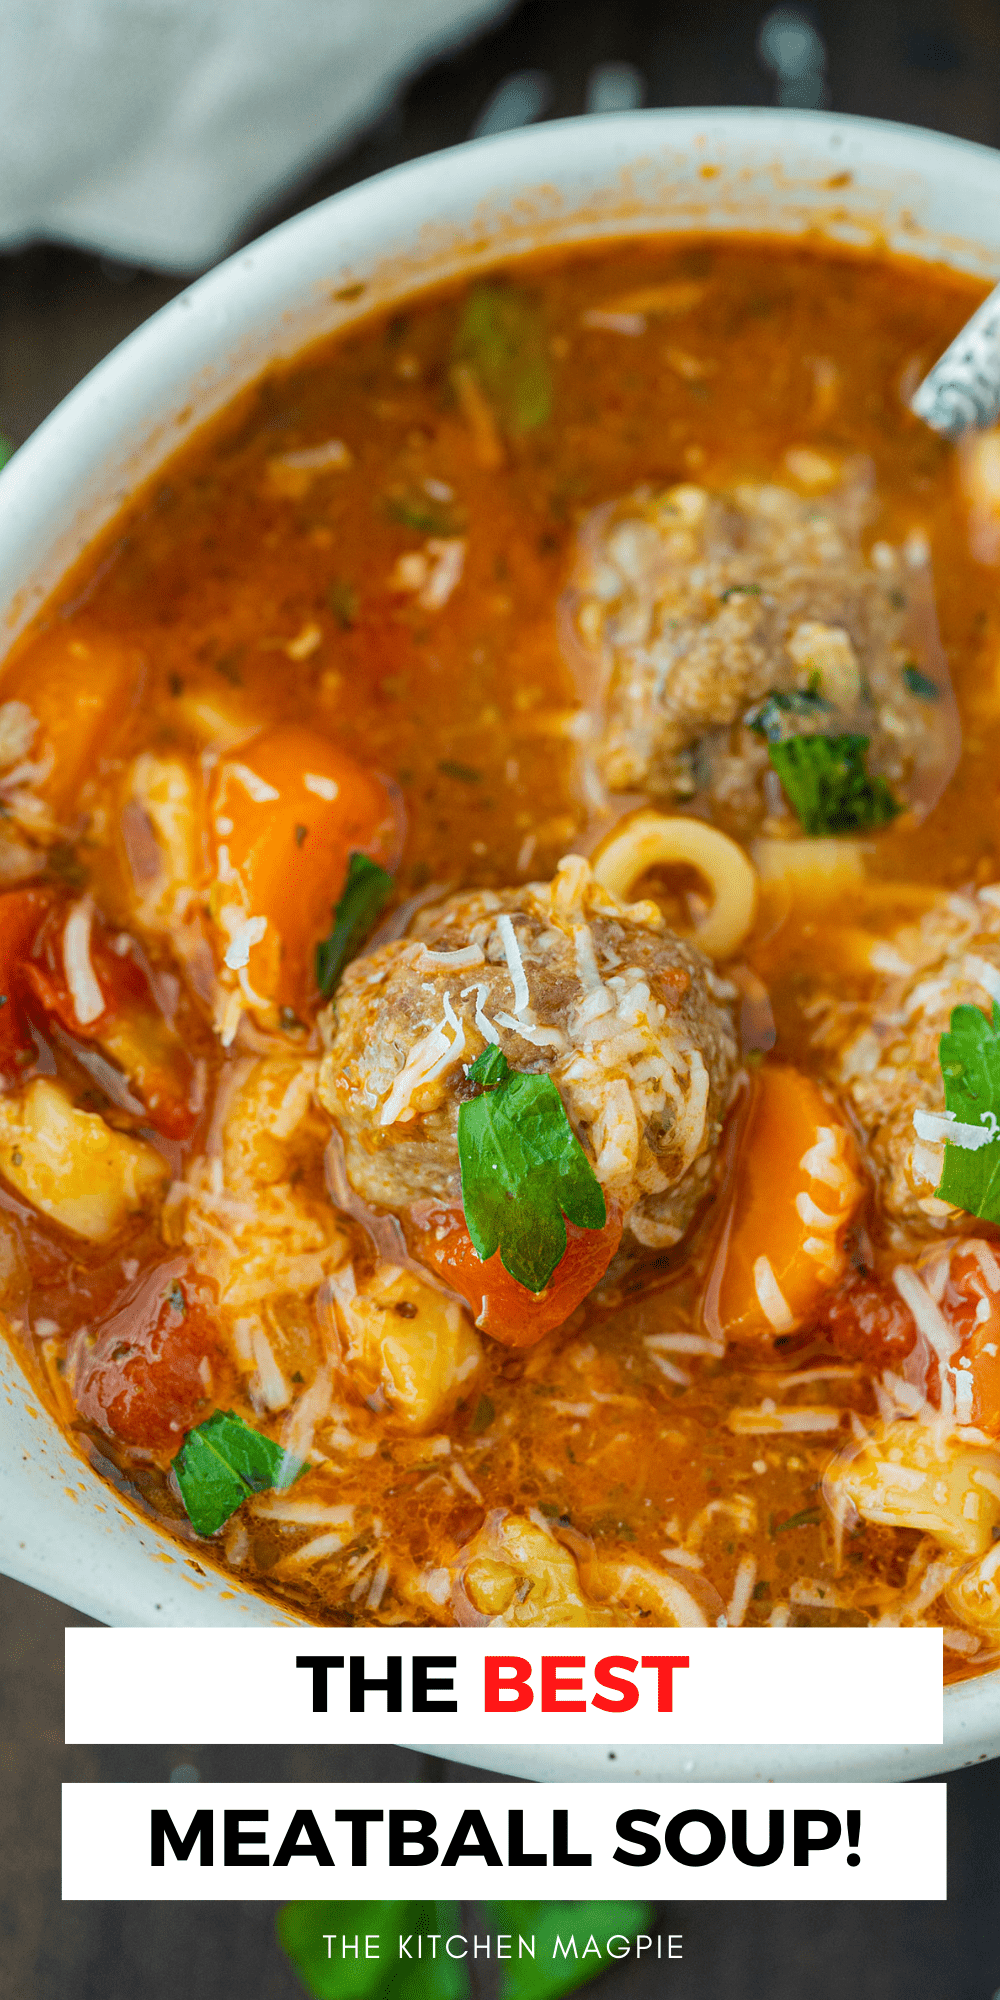 This meatballs soup has homemade meatballs that are simmered in a hearty tomato vegetable soup, making for a delicious dinner in one bowl that the whole family will love. 